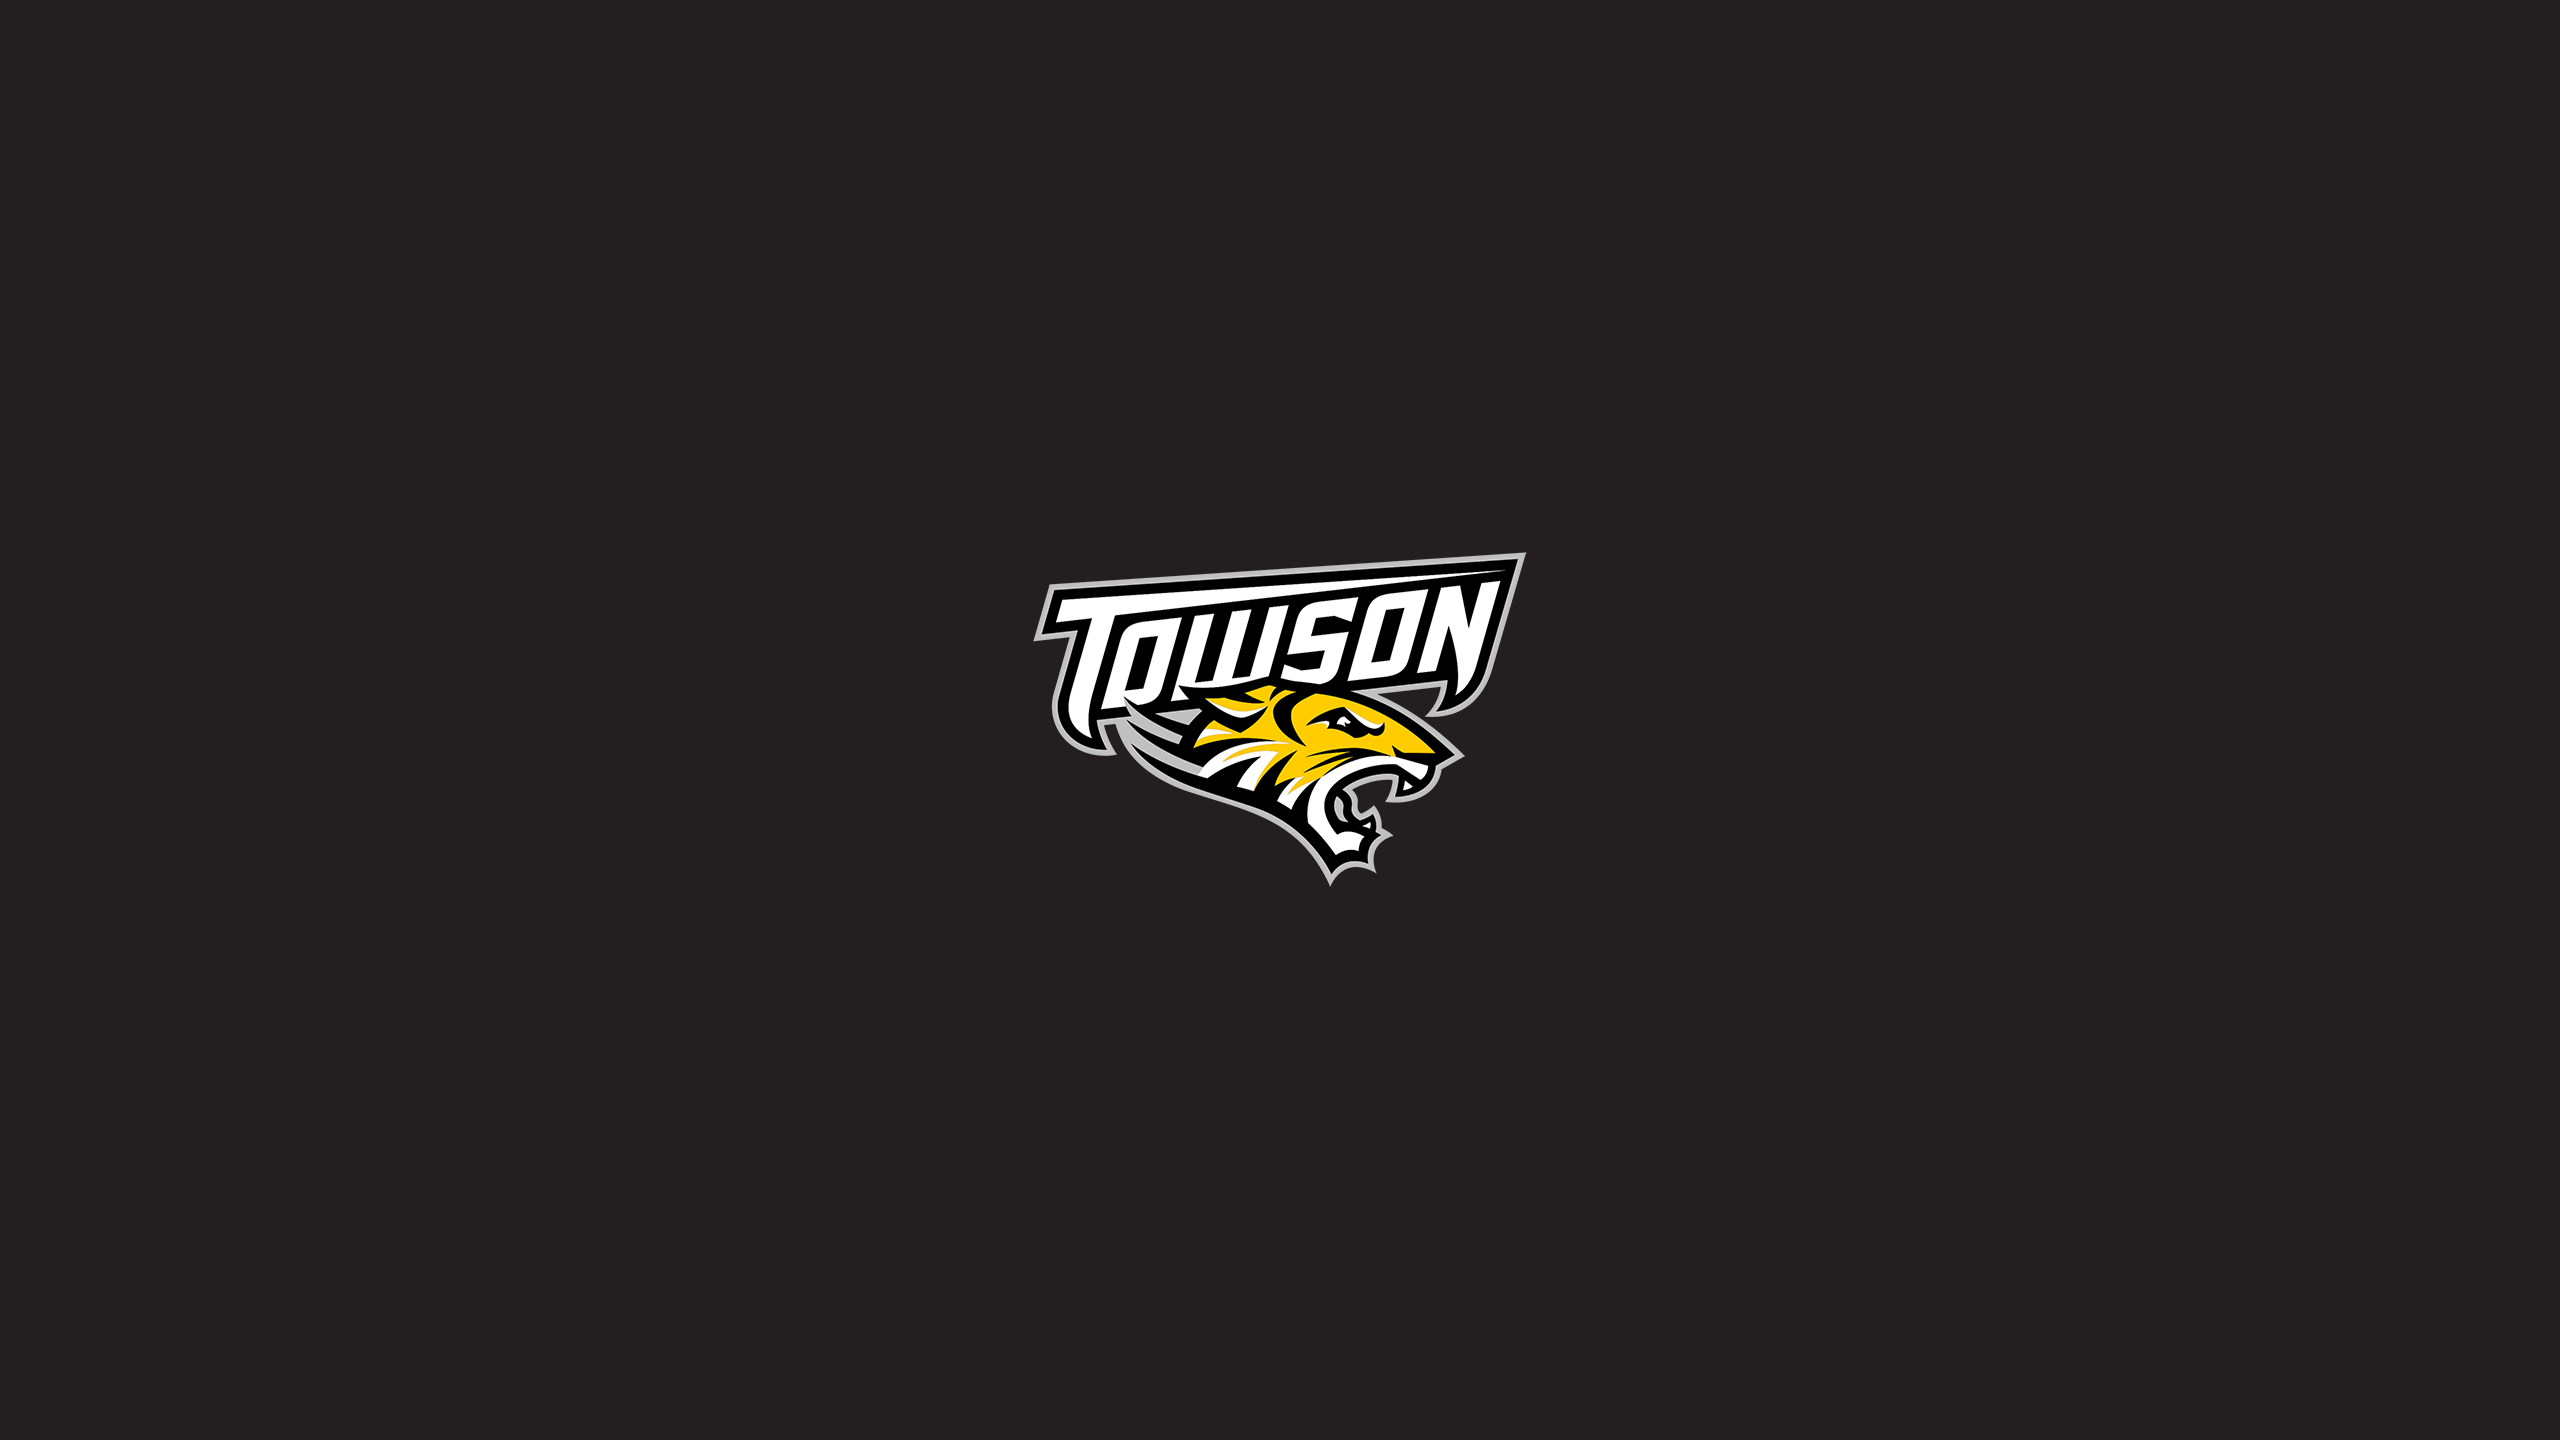 Towson Tigers Basketball - NCAAB - Square Bettor